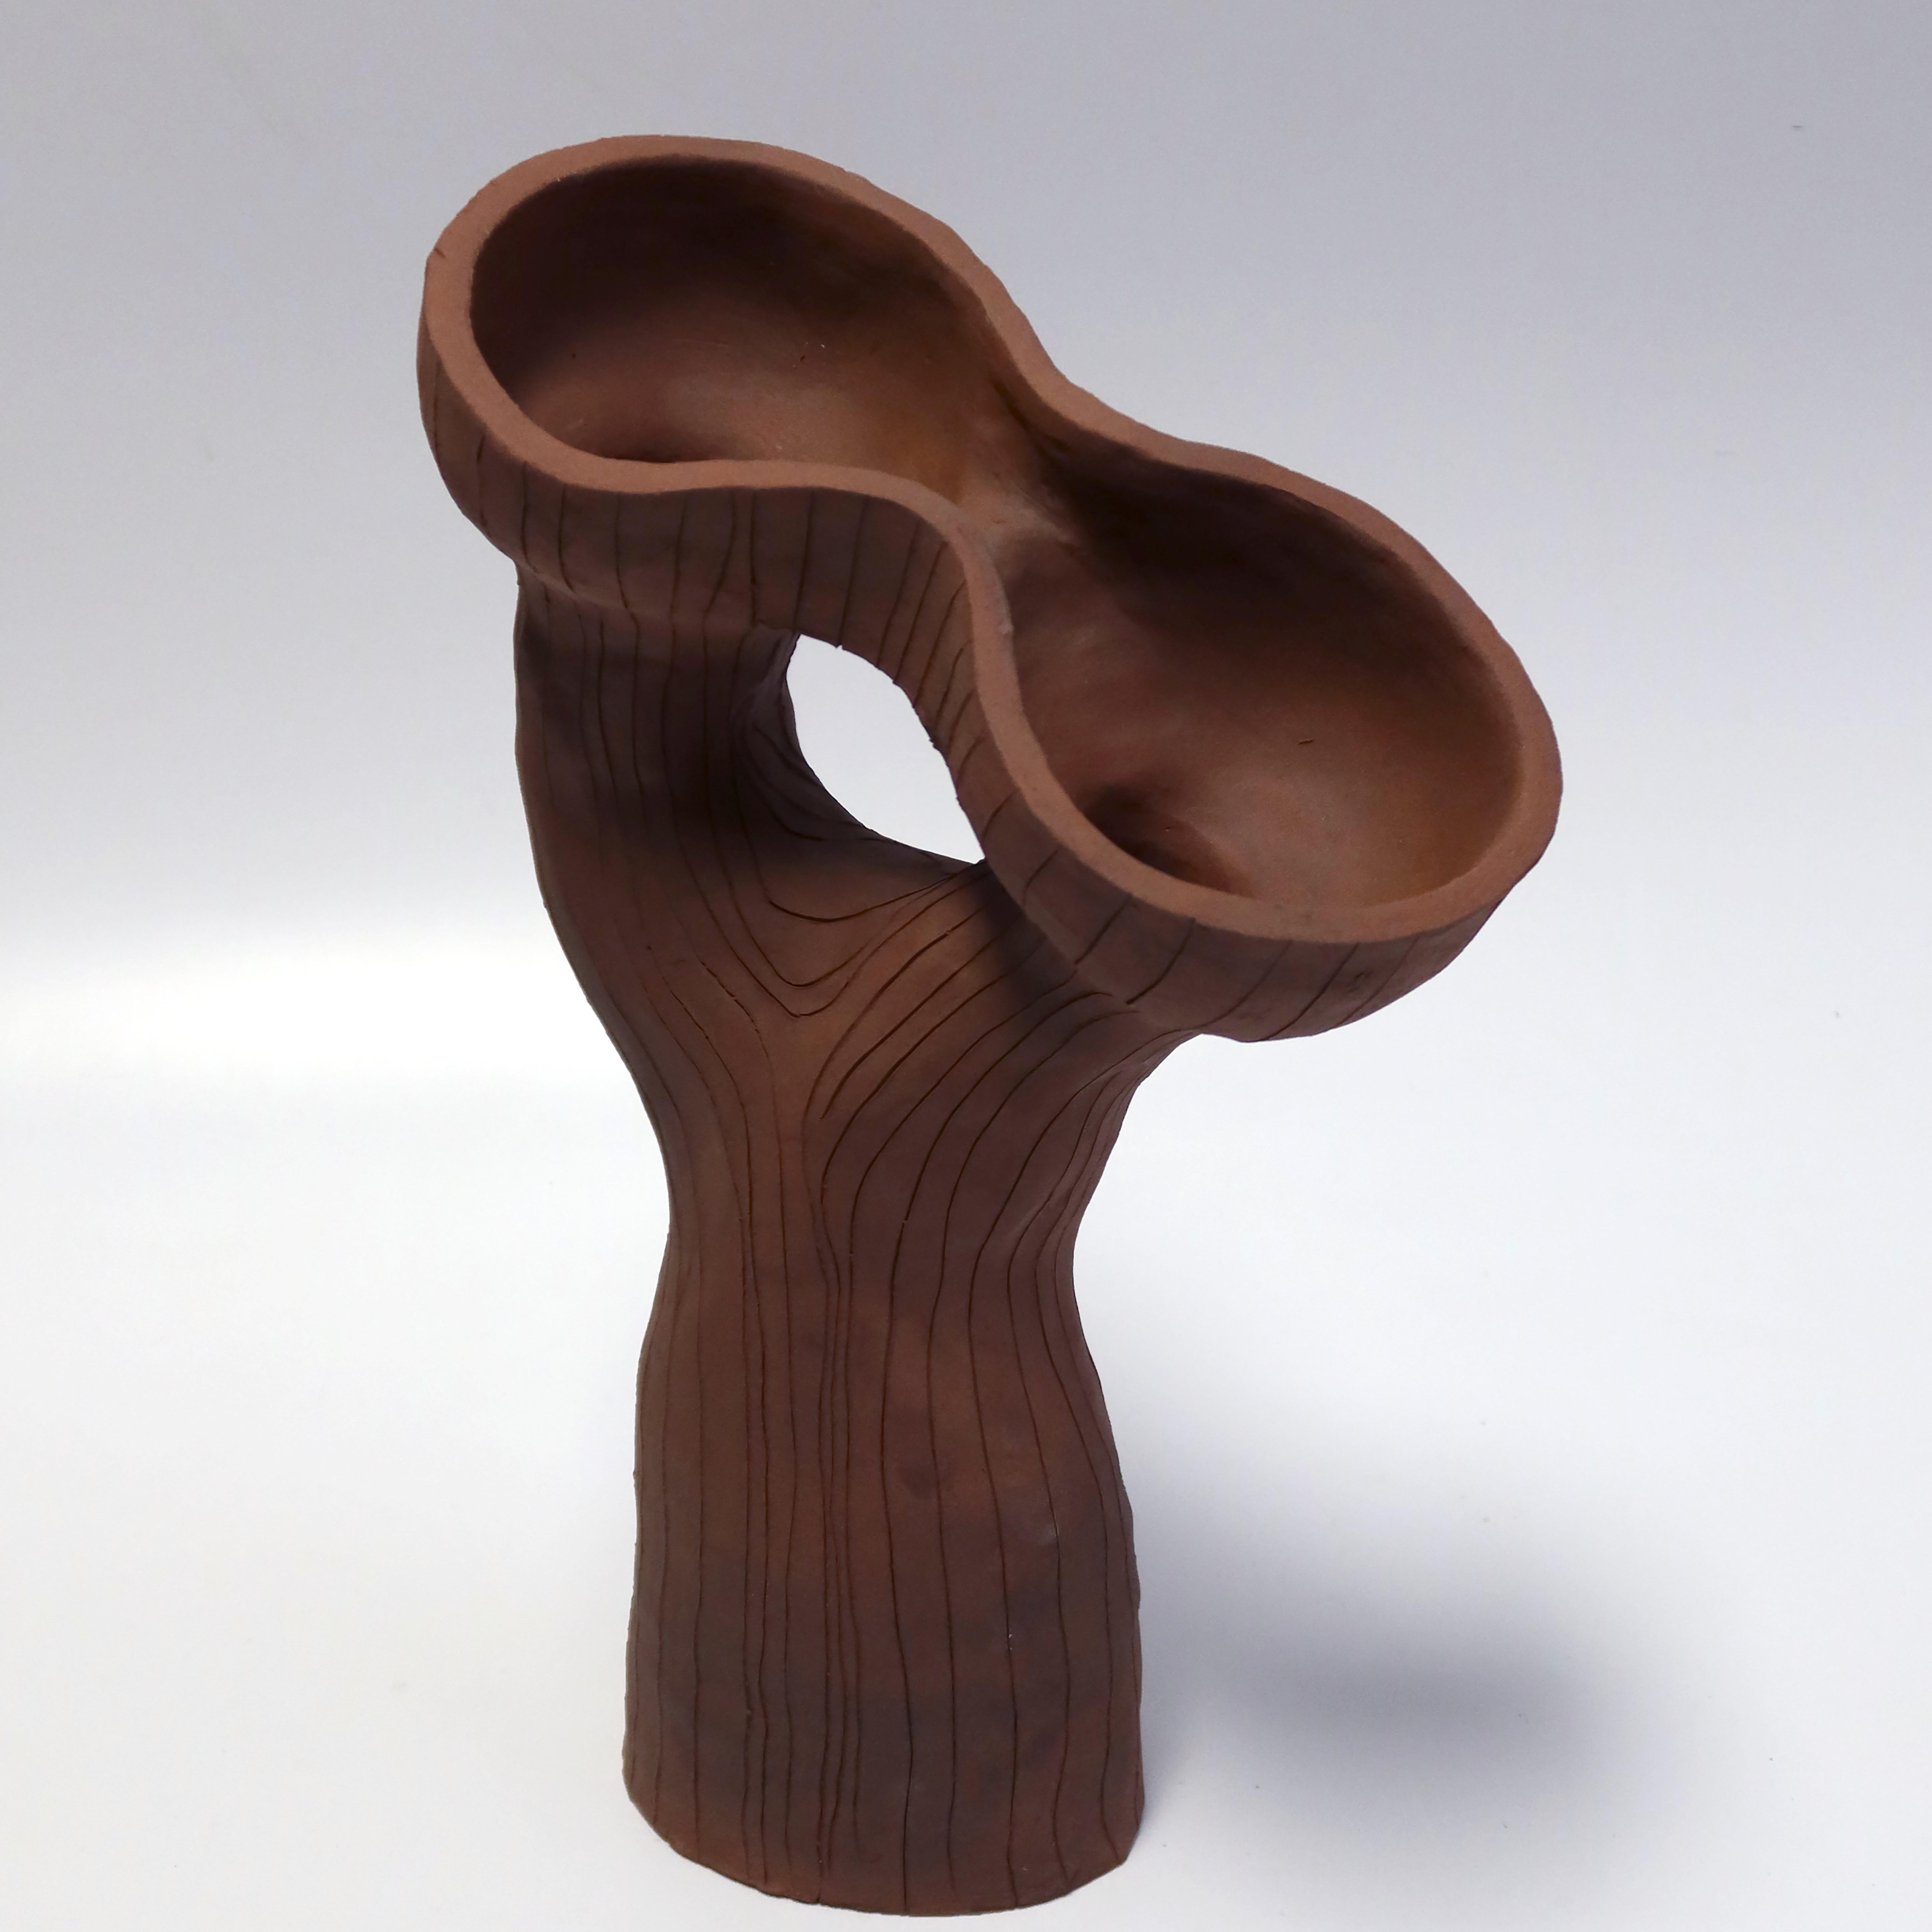 Two pod, one stem large by Jan Ernst
Dimensions: H 35 cm
Materials: Terracotta

Jan Ernst’s work takes on an experimental approach, as he prefers making bespoke pieces by hand. His organic design stems from his
abstract understanding of form